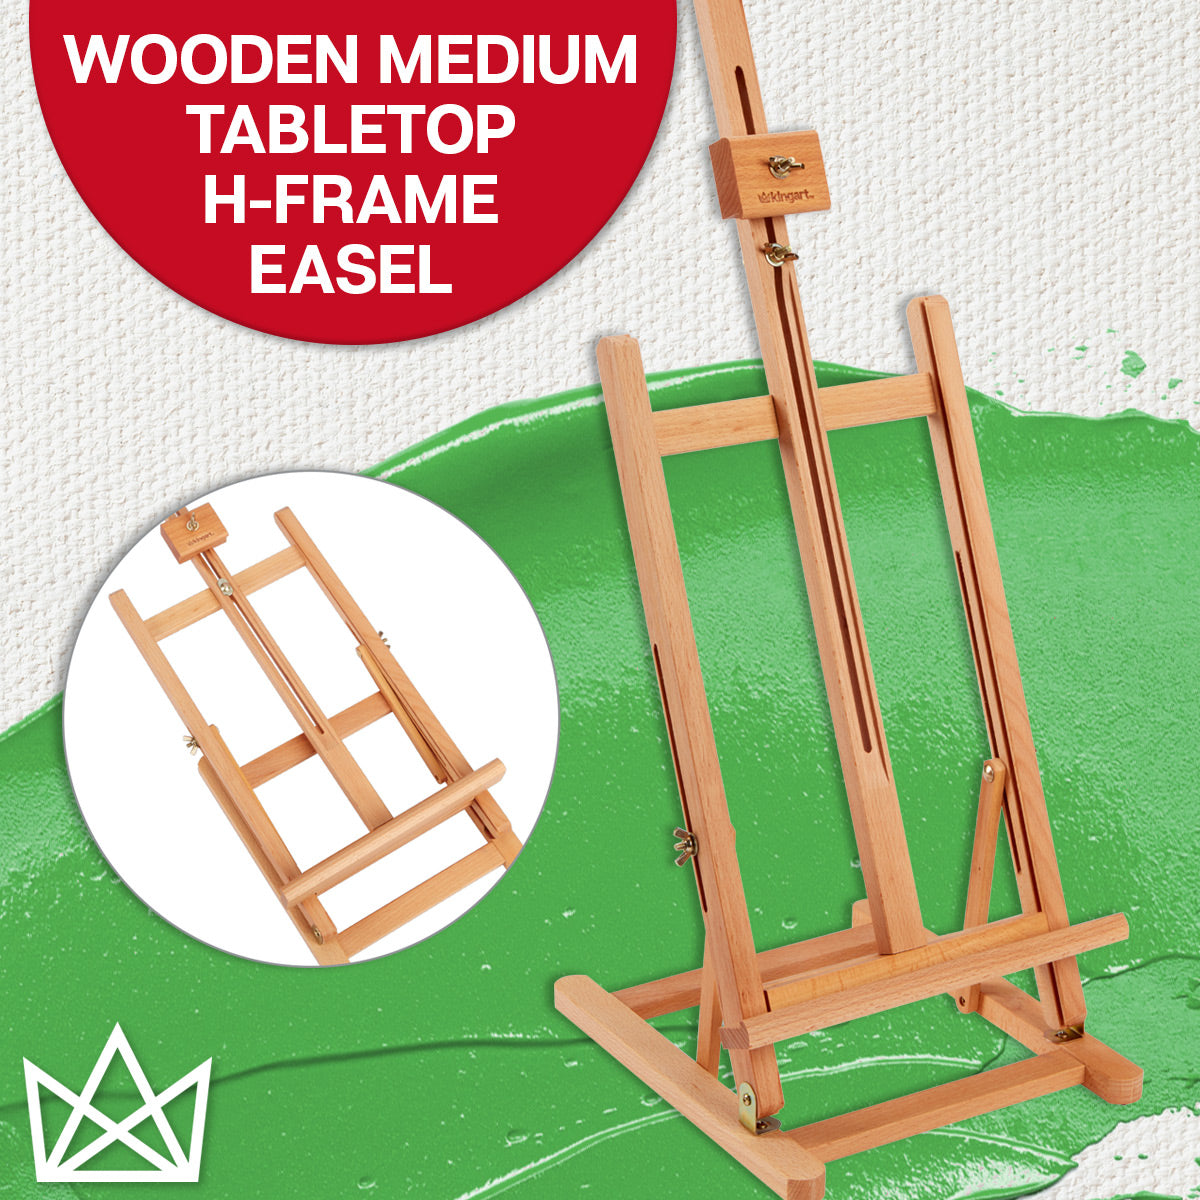 38 High Tabletop Wooden H-Frame Studio Easel - Artists Adjustable Painting  and Display Easel, 38” Easel - QFC